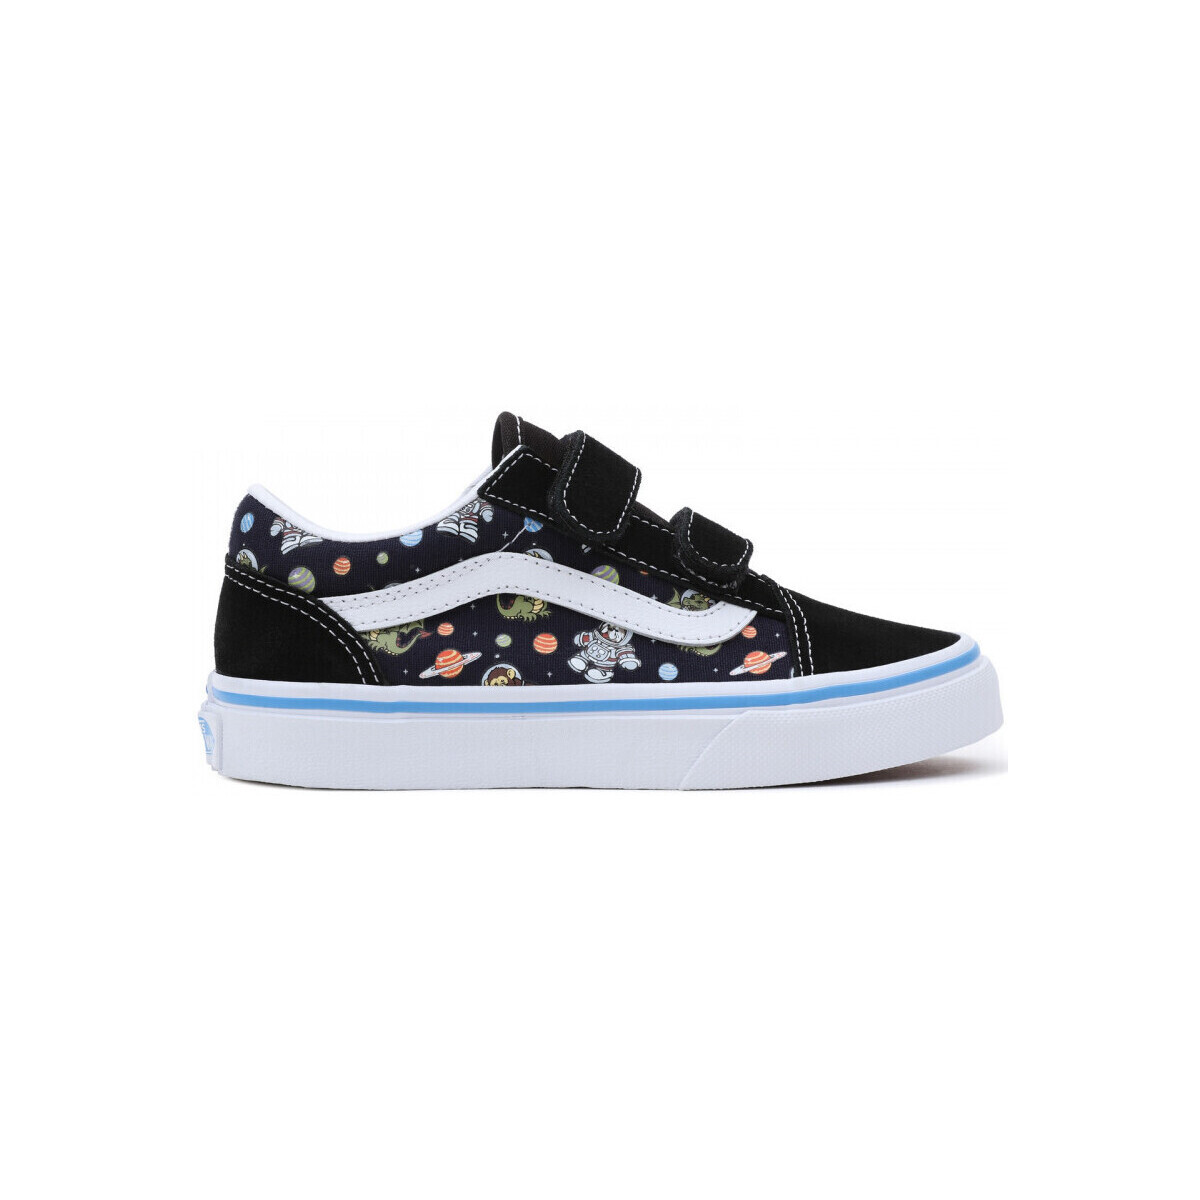 Sapatos Criança Star Wars x Vans Collection Officially Unveiled Old skool v glow cosmic zoo Preto